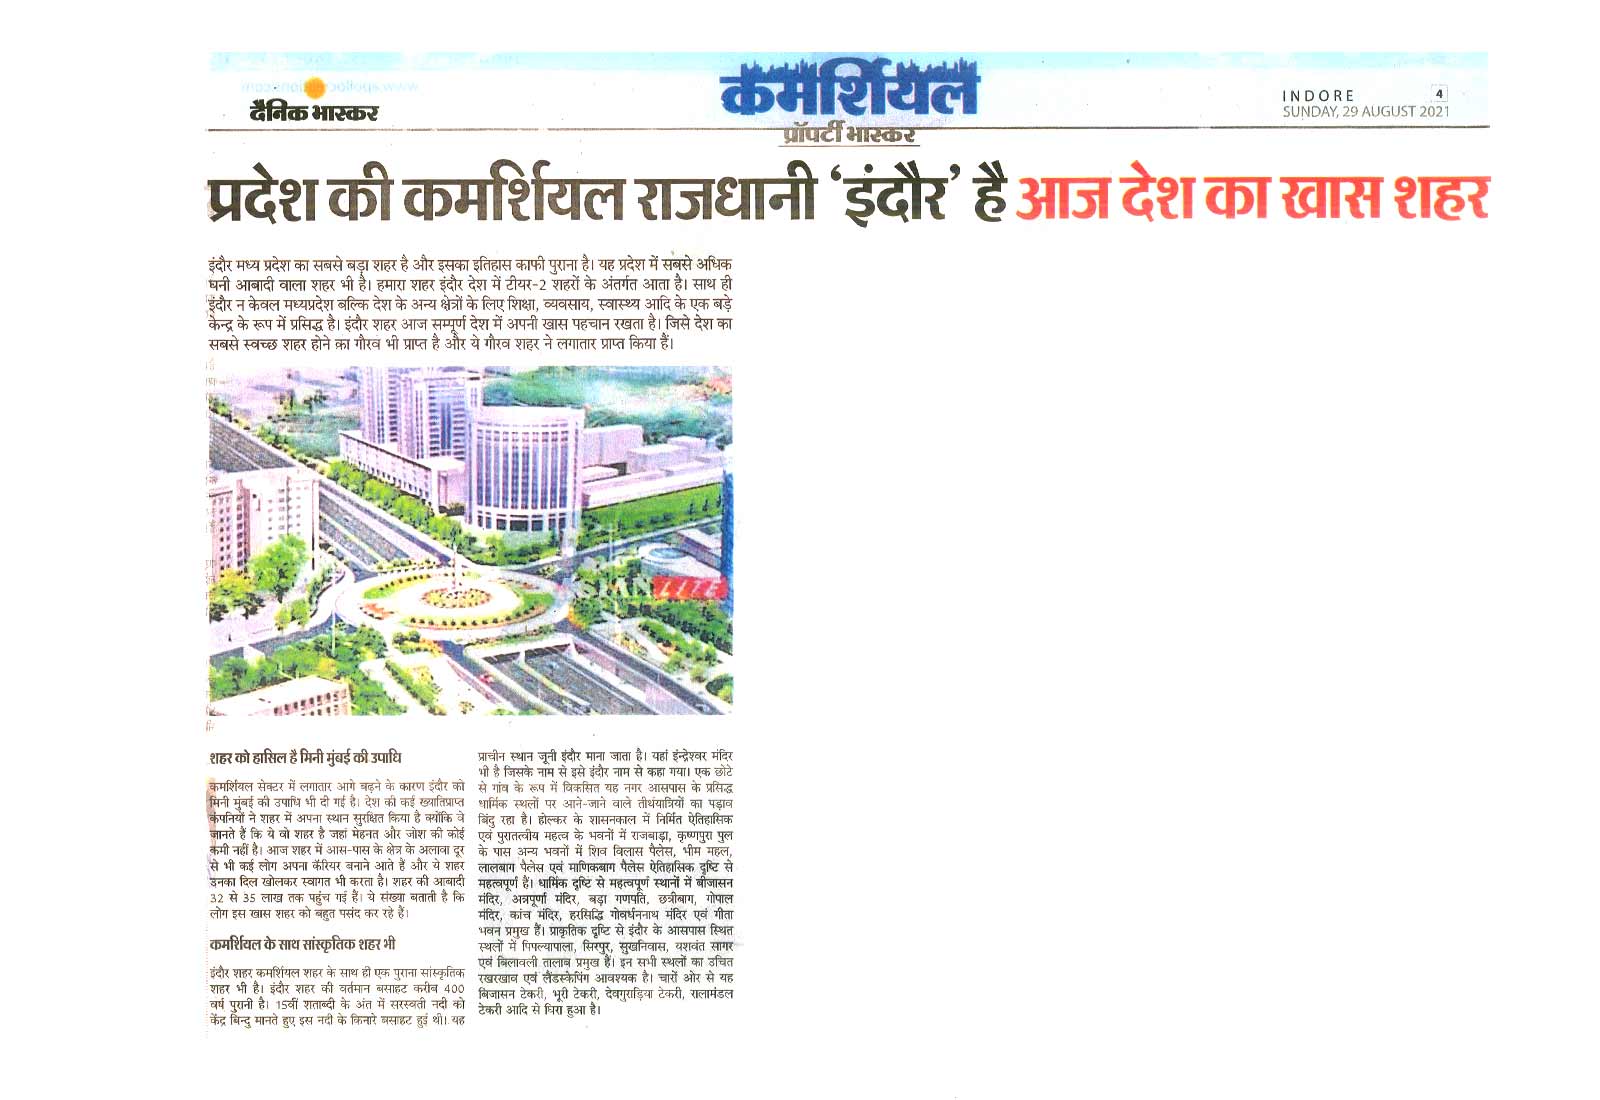 MP's commercial district Indore now becomes India's Special City